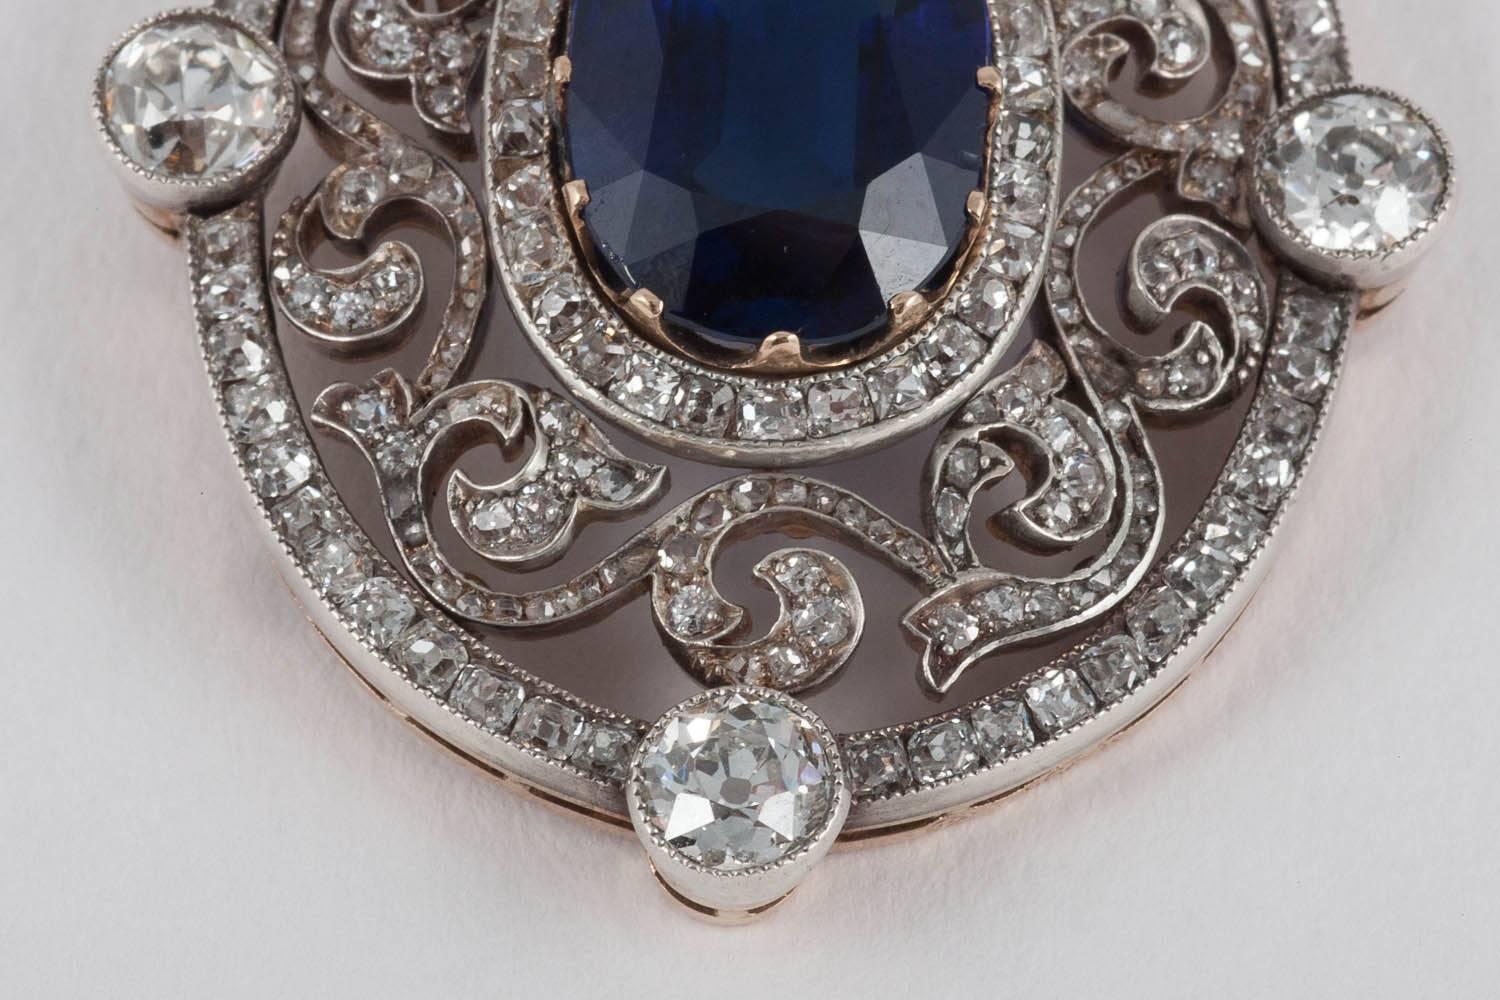 A rare piece of Faberge jewellery, the pendant is unusually set with an important natural un-heated Burma sapphire, whilst most pieces of Faberge jewellery do not use such important stones, as they rely upon the exceptional quality of the